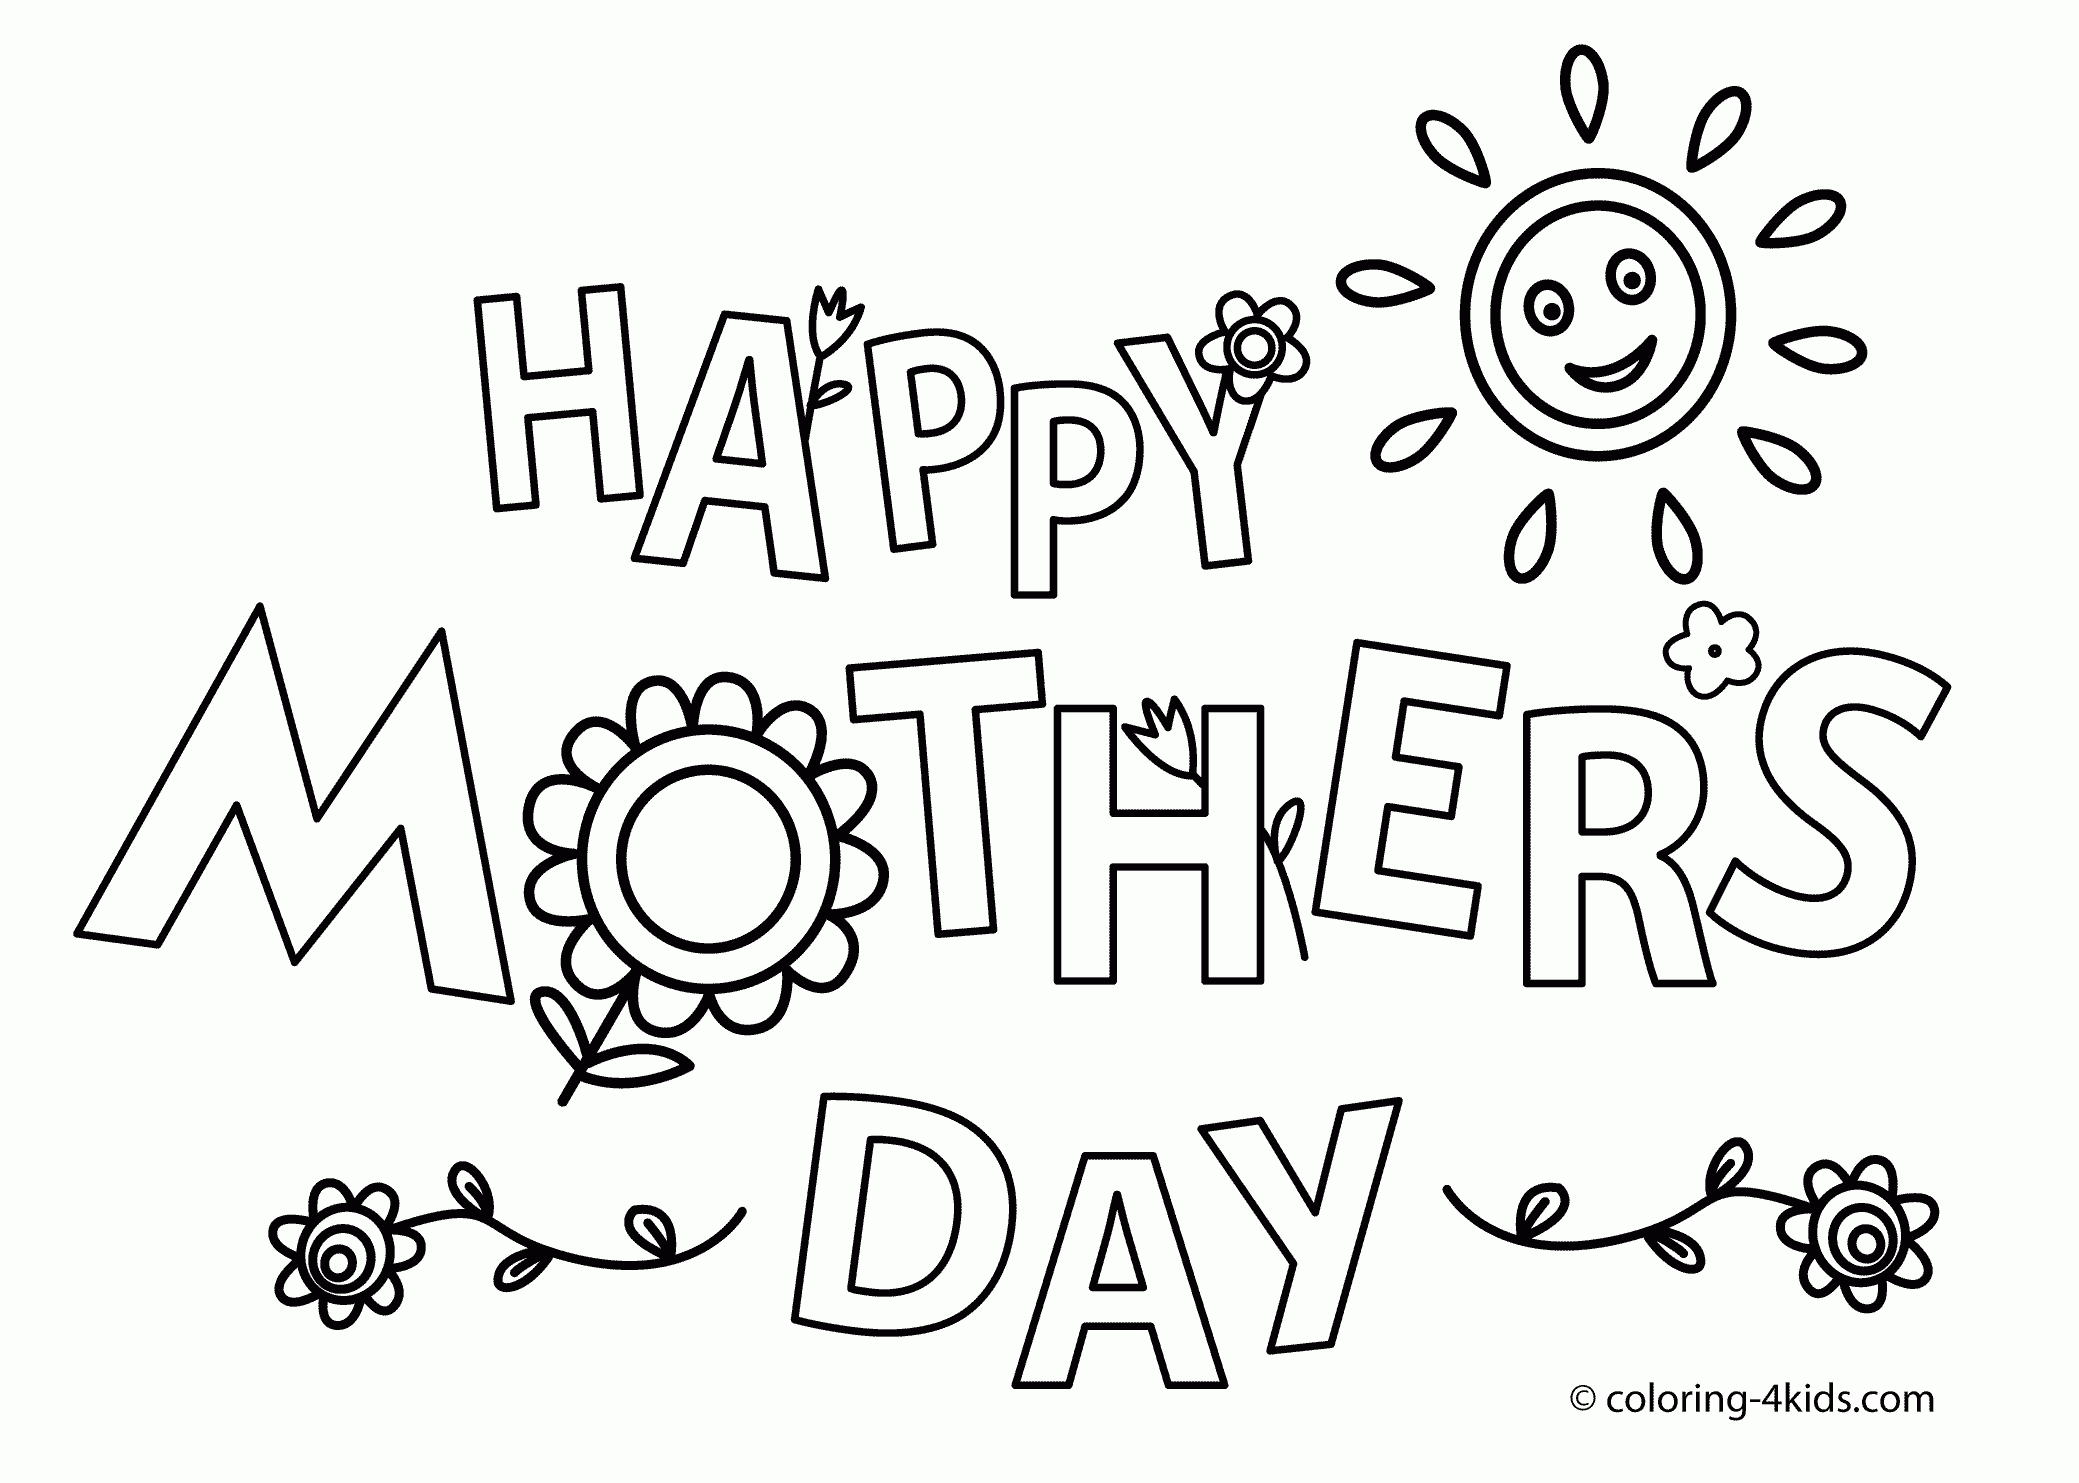 Happy Mothers Day Coloring Page - Best Coloring Pages For Kids - Free Printable Mothers Day Coloring Pages